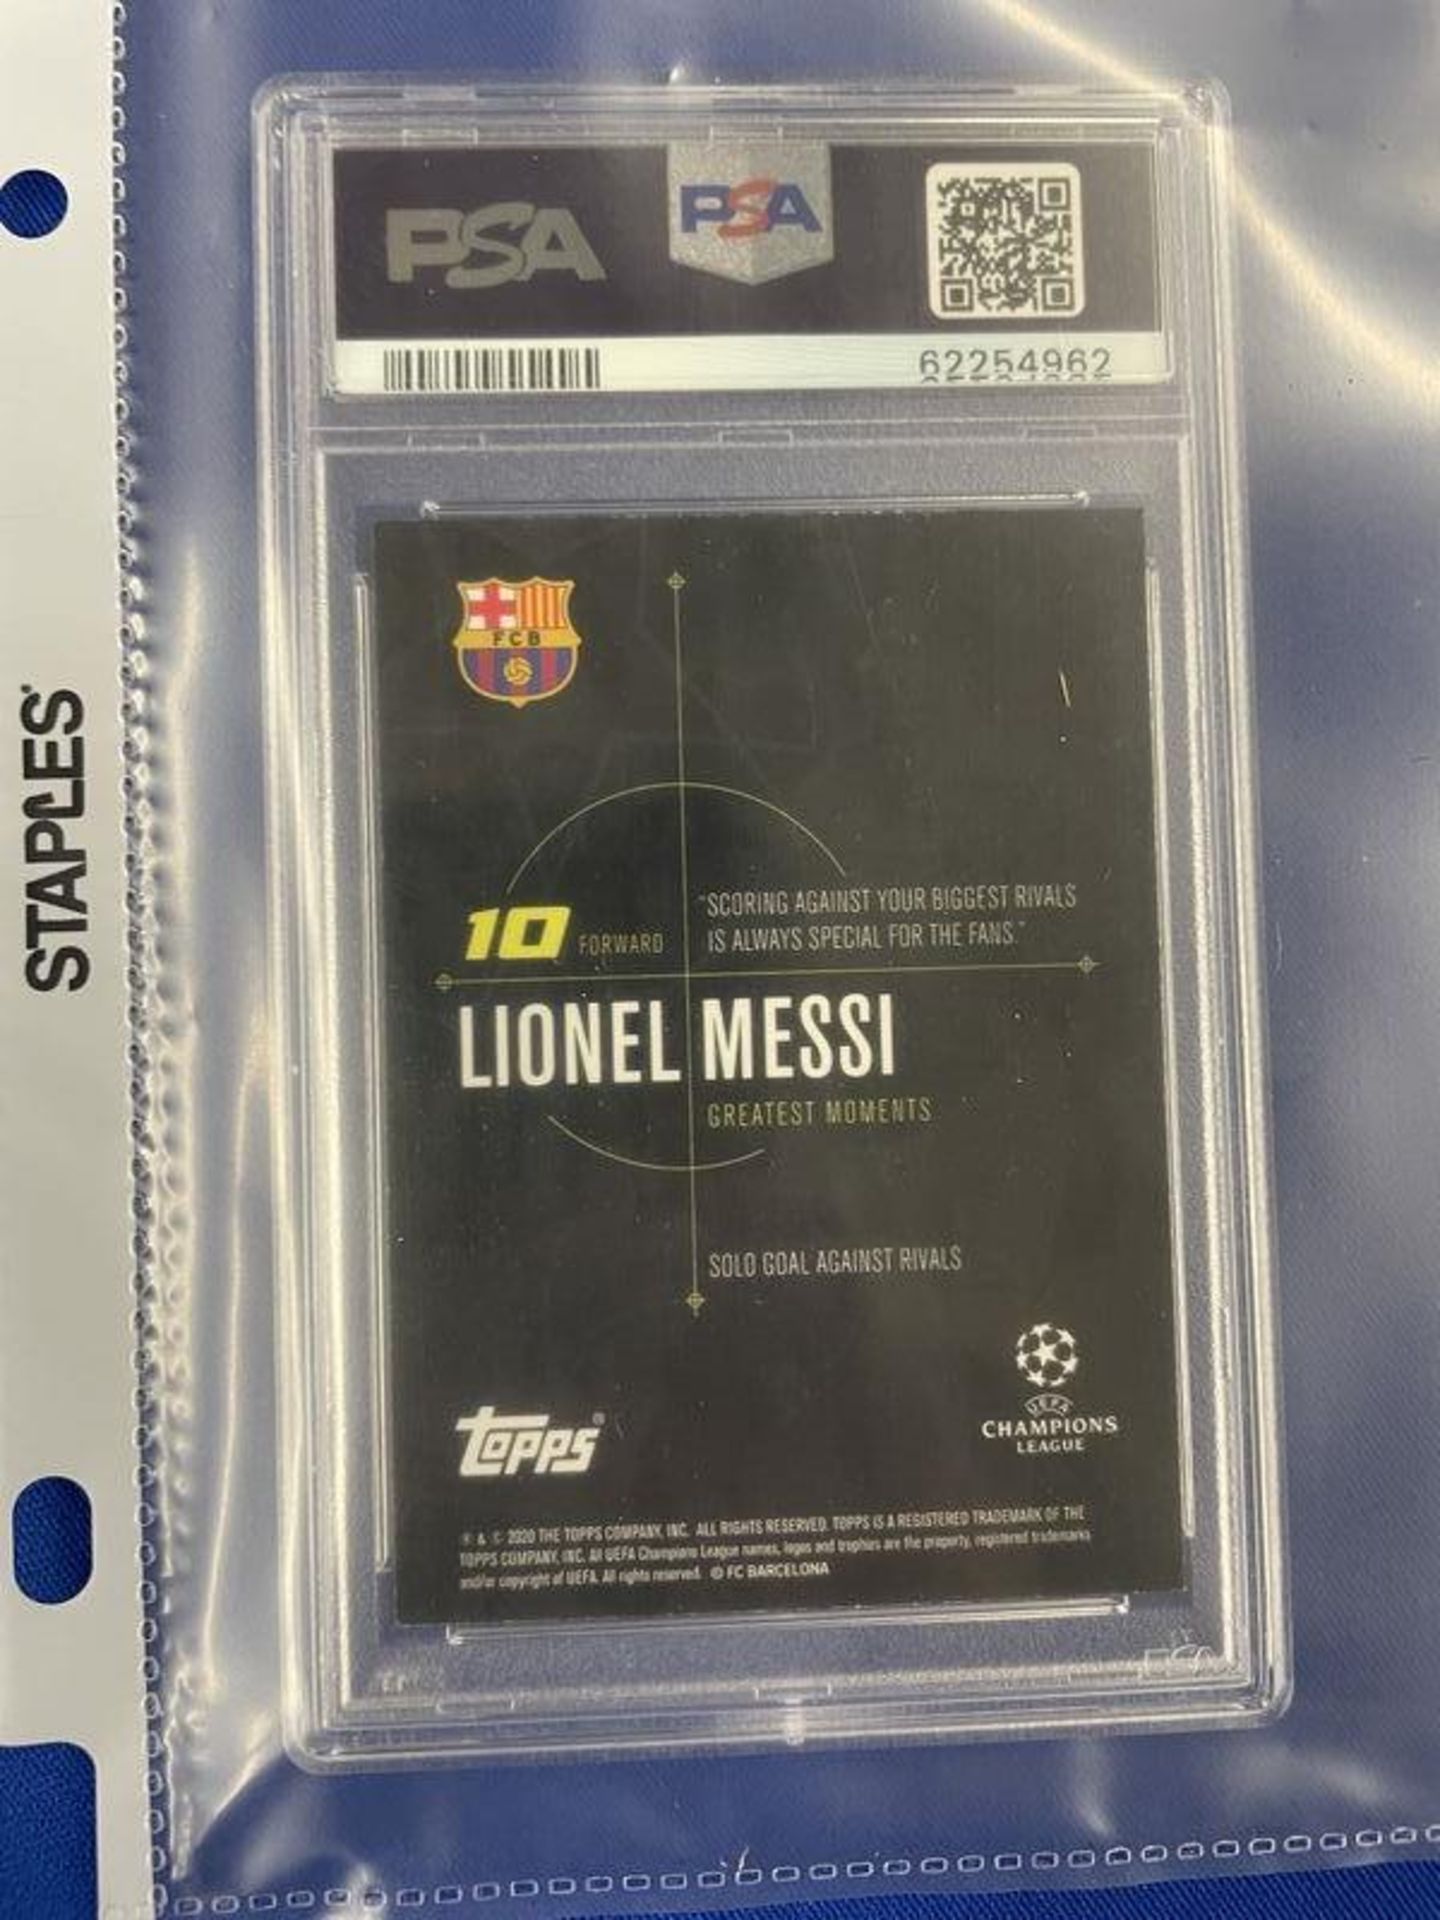 (LOT) 2014 FIFA Argentina Hat (NIB) and Messi Topps Player Card PSA Graded Mint 9 (April 2011) - Image 2 of 3